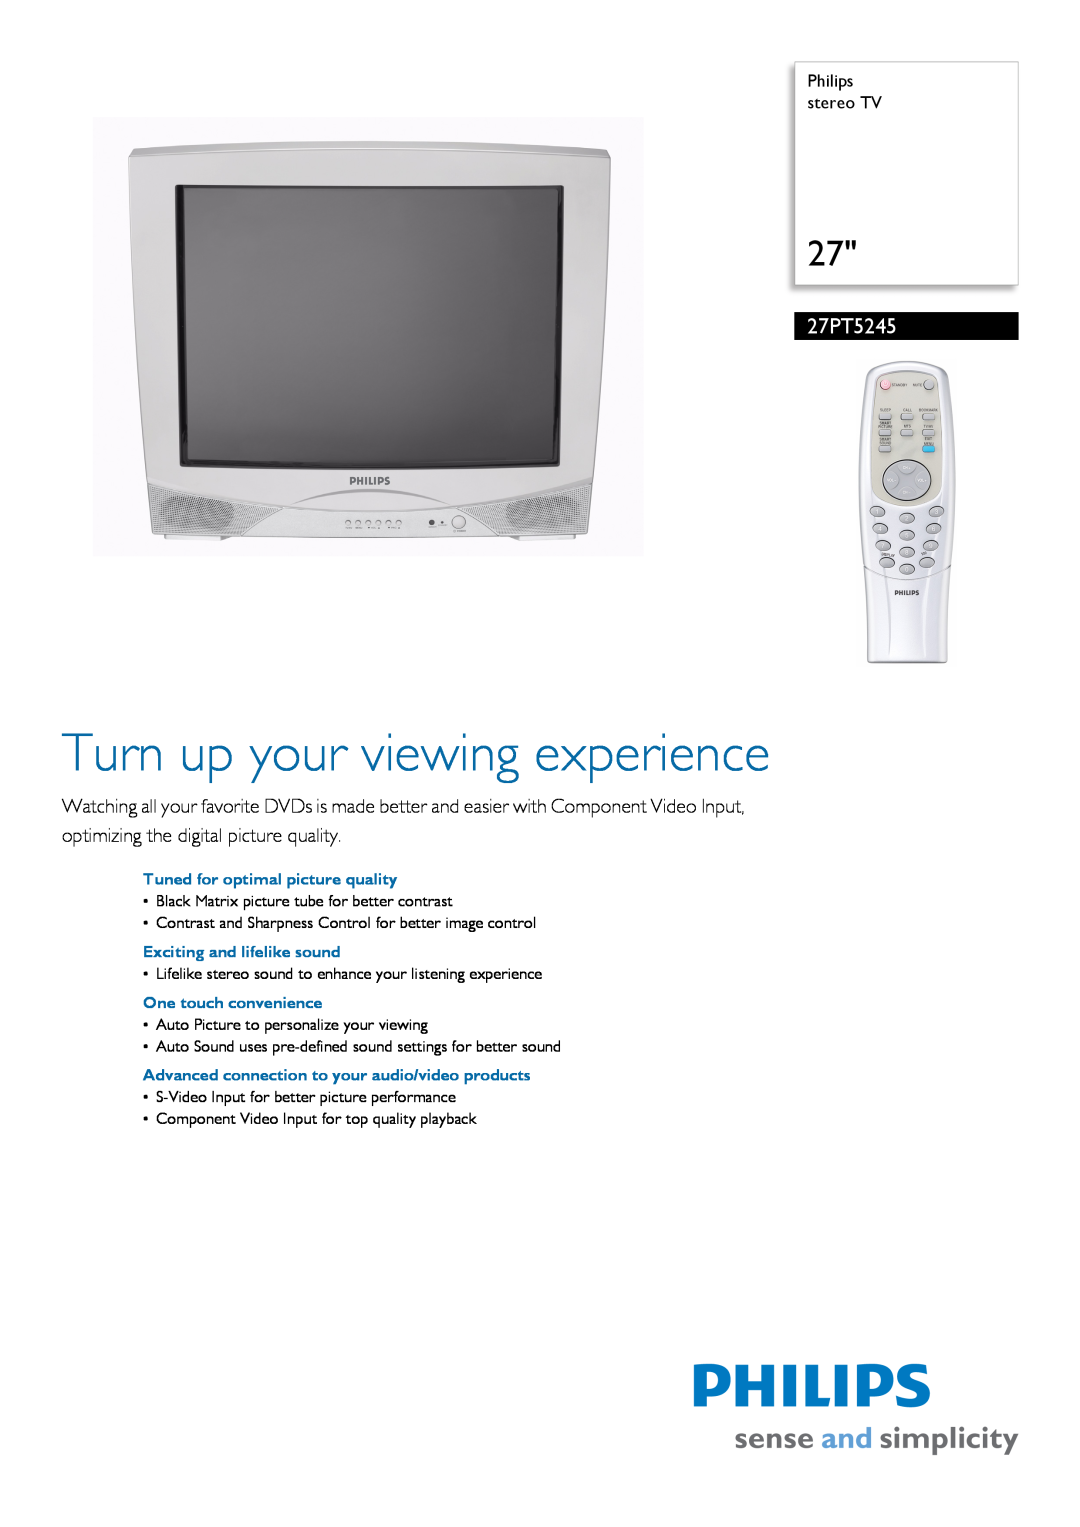 Philips 27PT5245 manual Philips stereo TV, Turn up your viewing experience 